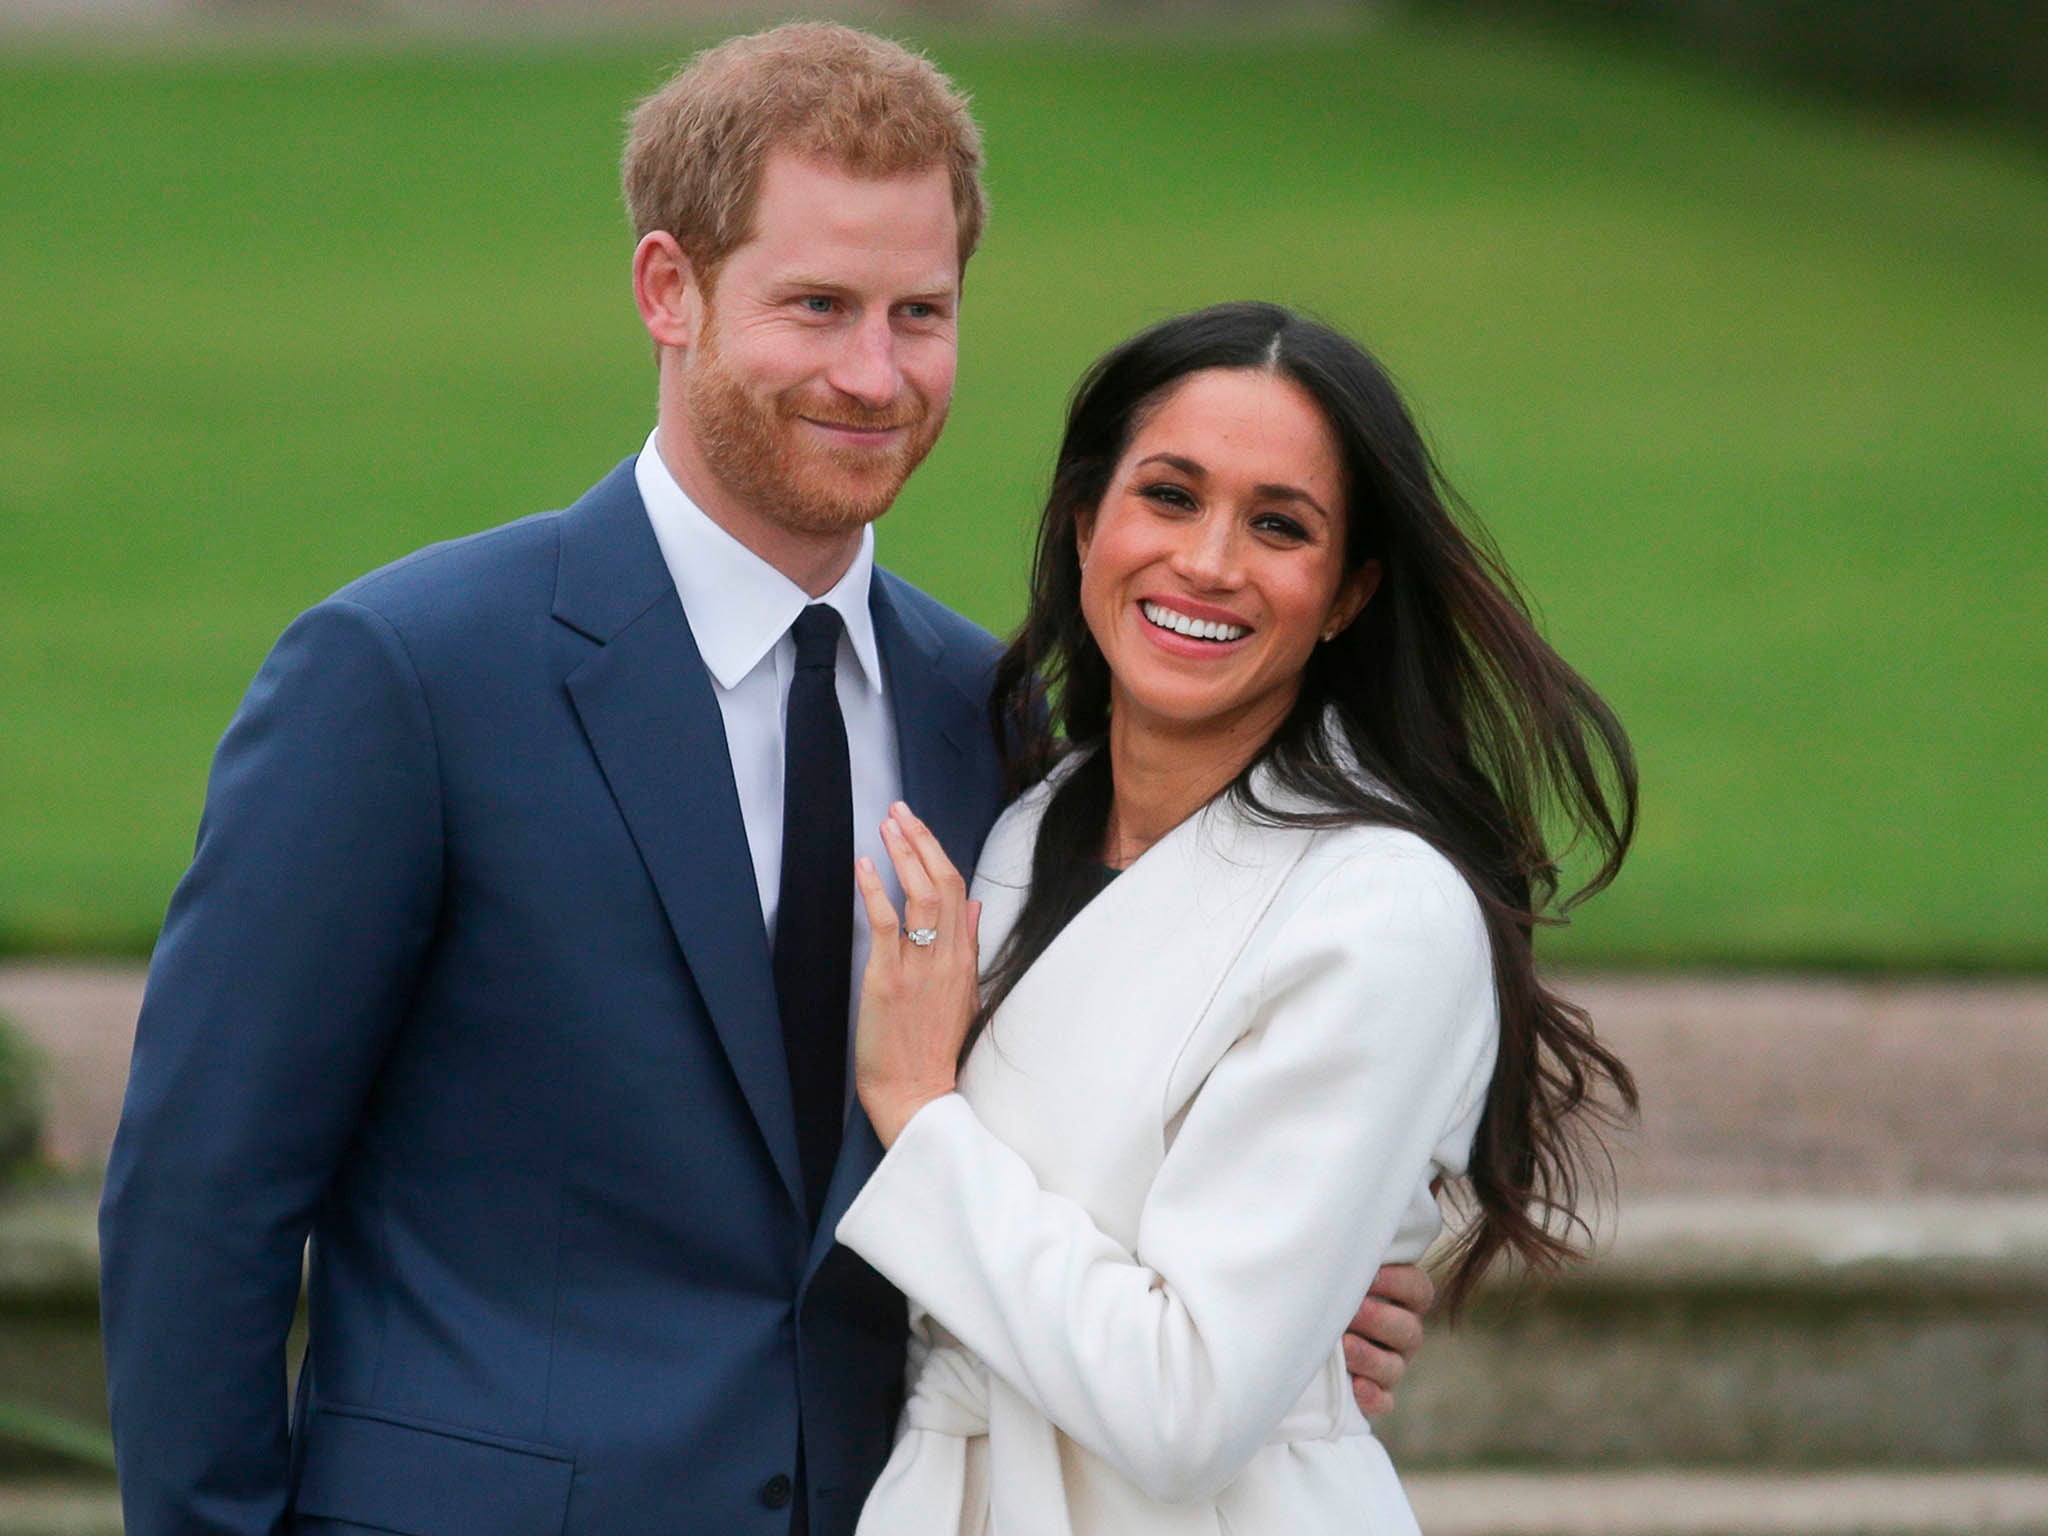 Prince Harry and his fiancée Meghan Markle pose at Kensington Palace following the announcement of their engagement